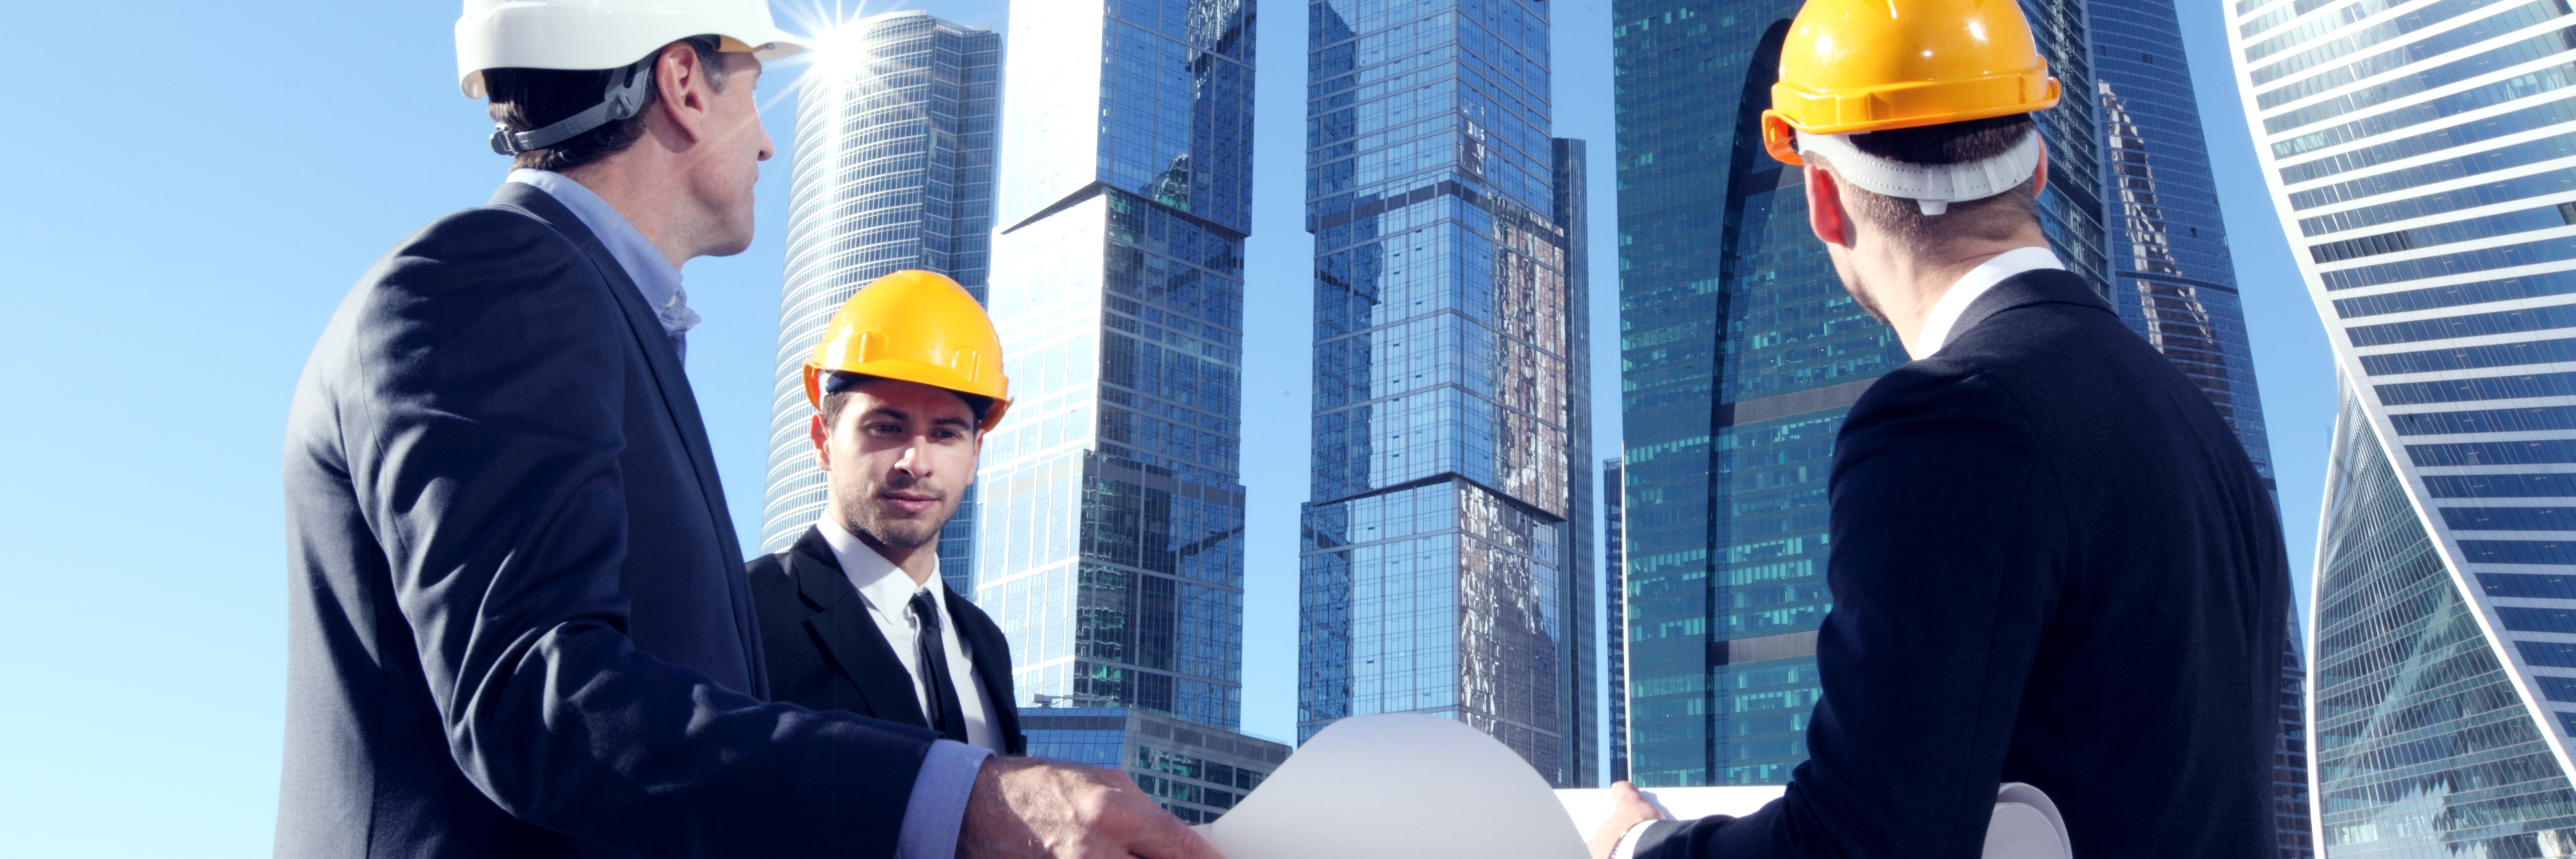 Building owners and engineers overlooking a construction site with builders insurance